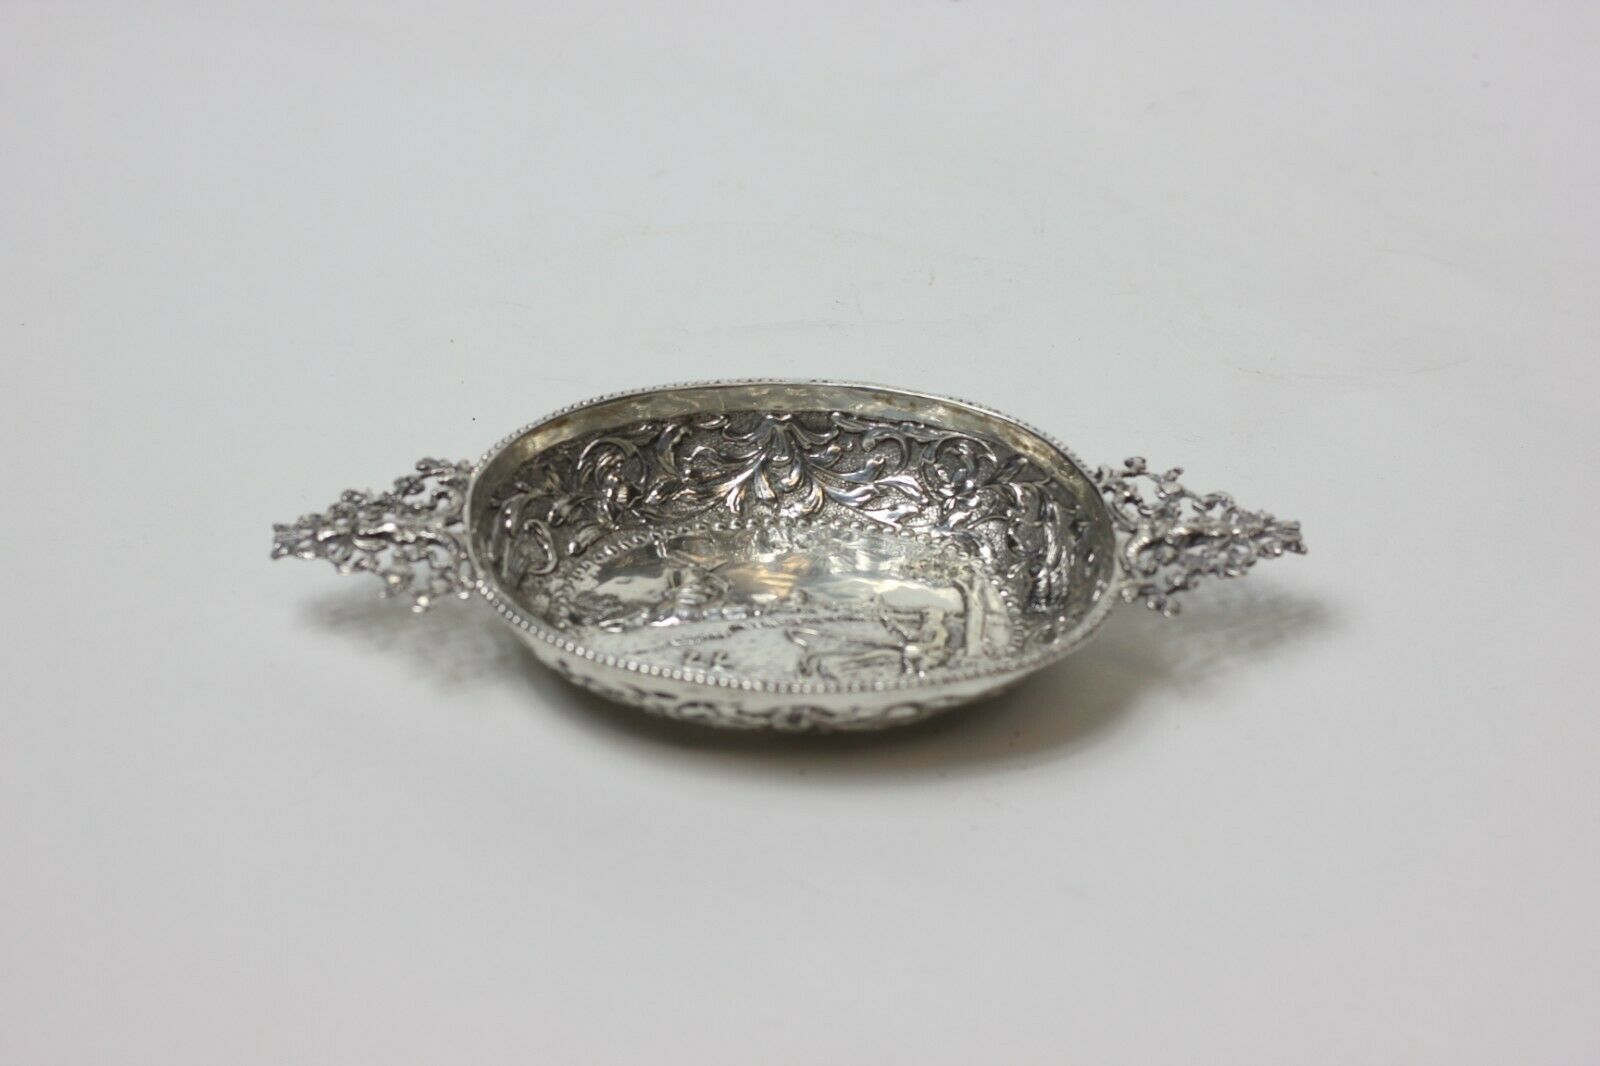 Antique German Hallmarked 13 Silver Brandy Bowl In Repousse, Early Silver